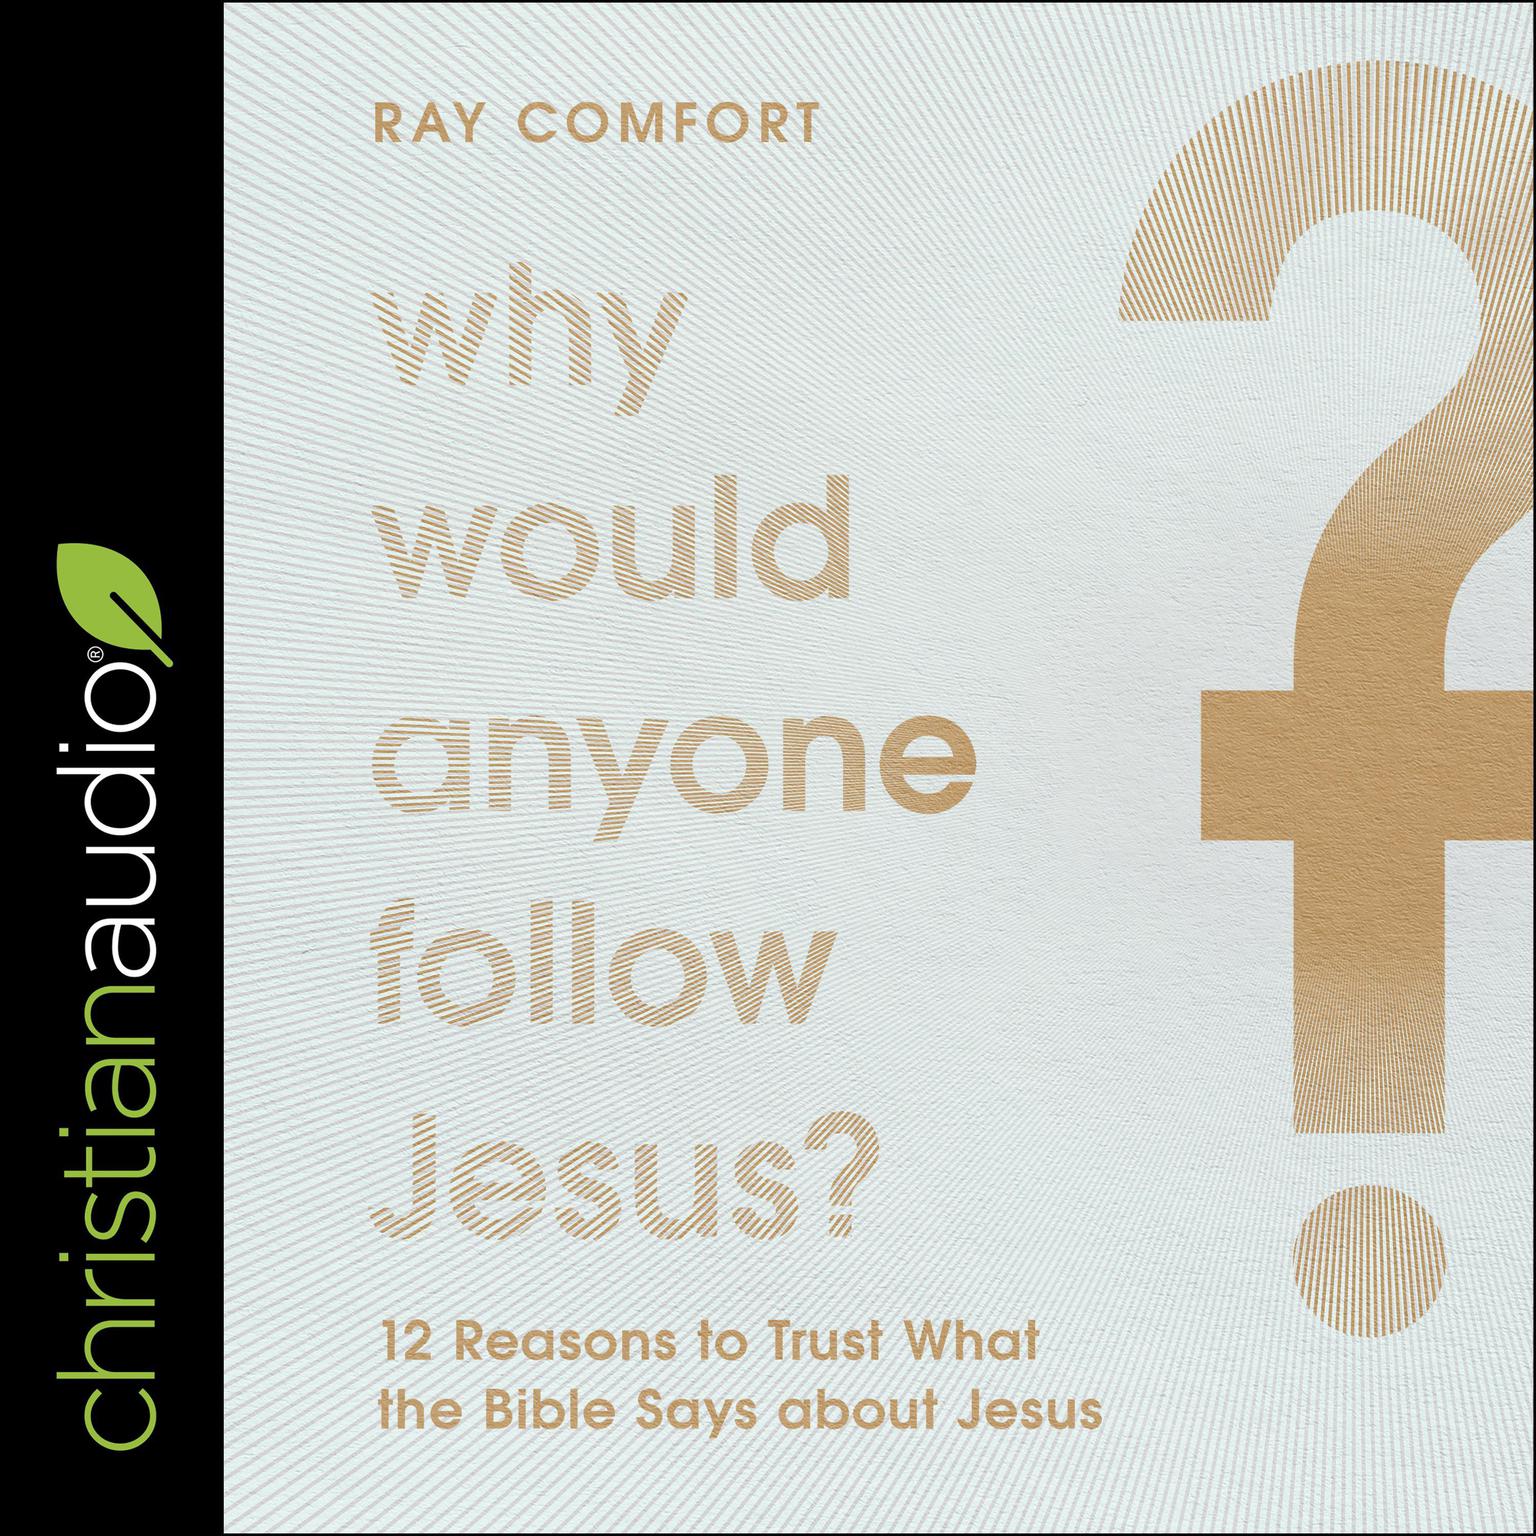 Why Would Anyone Follow Jesus?: 12 Reasons to Trust What the Bible Says about Jesus Audiobook, by Ray Comfort